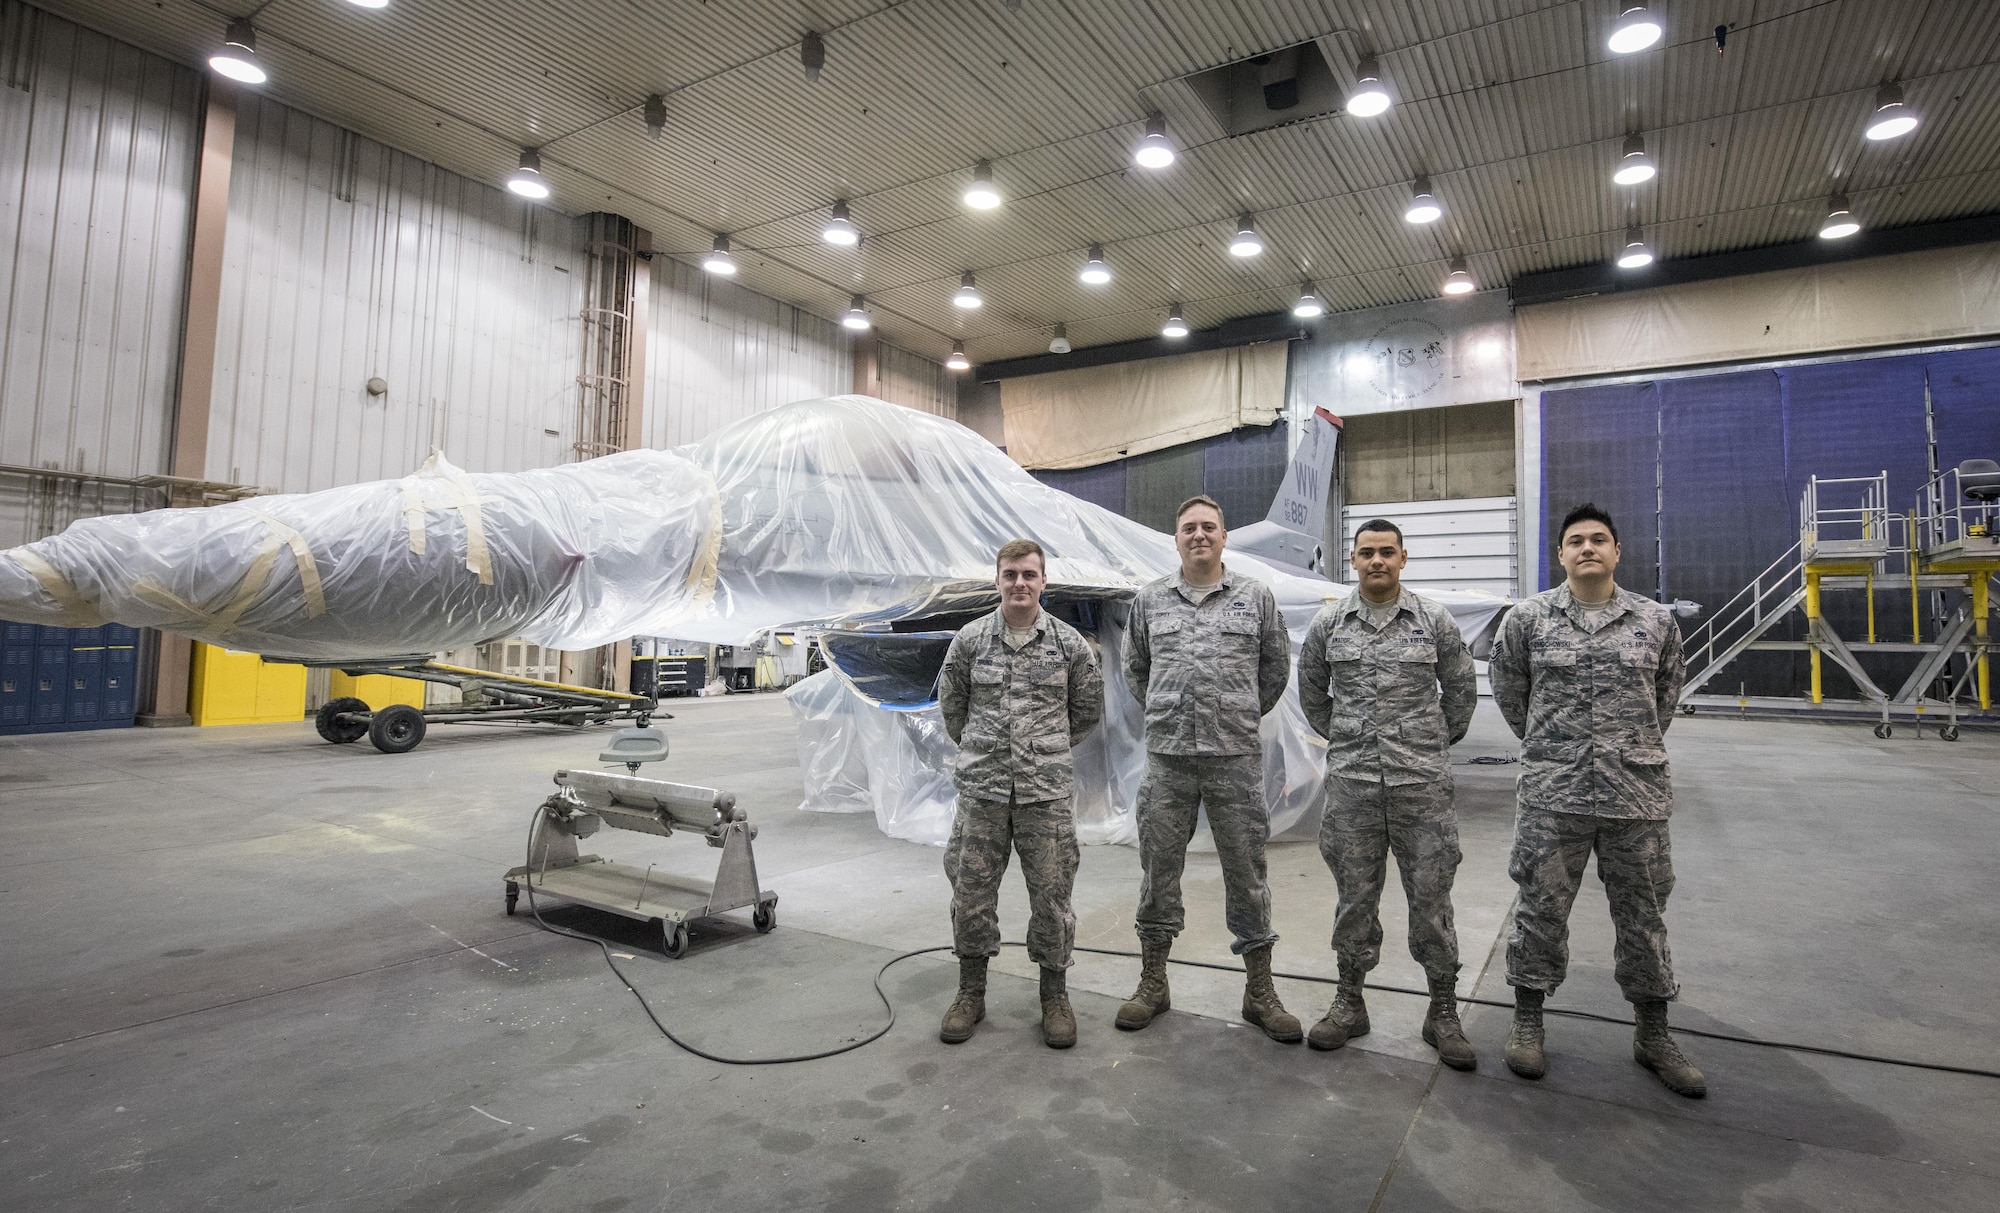 U.S. Air Force Airman 1st Class William Brunz, left to right, Tech. Sgt. Adam Corey, Airman 1st Class Candelario Amador and Staff Sgt. Edward Cimochowski, all 35th Maintenance Squadron aircraft structural maintainers assigned to Misawa Air Base, Japan, stand in front of an F-16 Fighting Falcon at Eielson Air Force Base, Alaska, May 15, 2017. The 35th MXS Airmen developed tactics, techniques and procedures to overcome the paint issue the rest of Pacific F-16 squadrons have since adopted. (U.S. Air Force photo by Tech. Sgt. Araceli Alarcon)